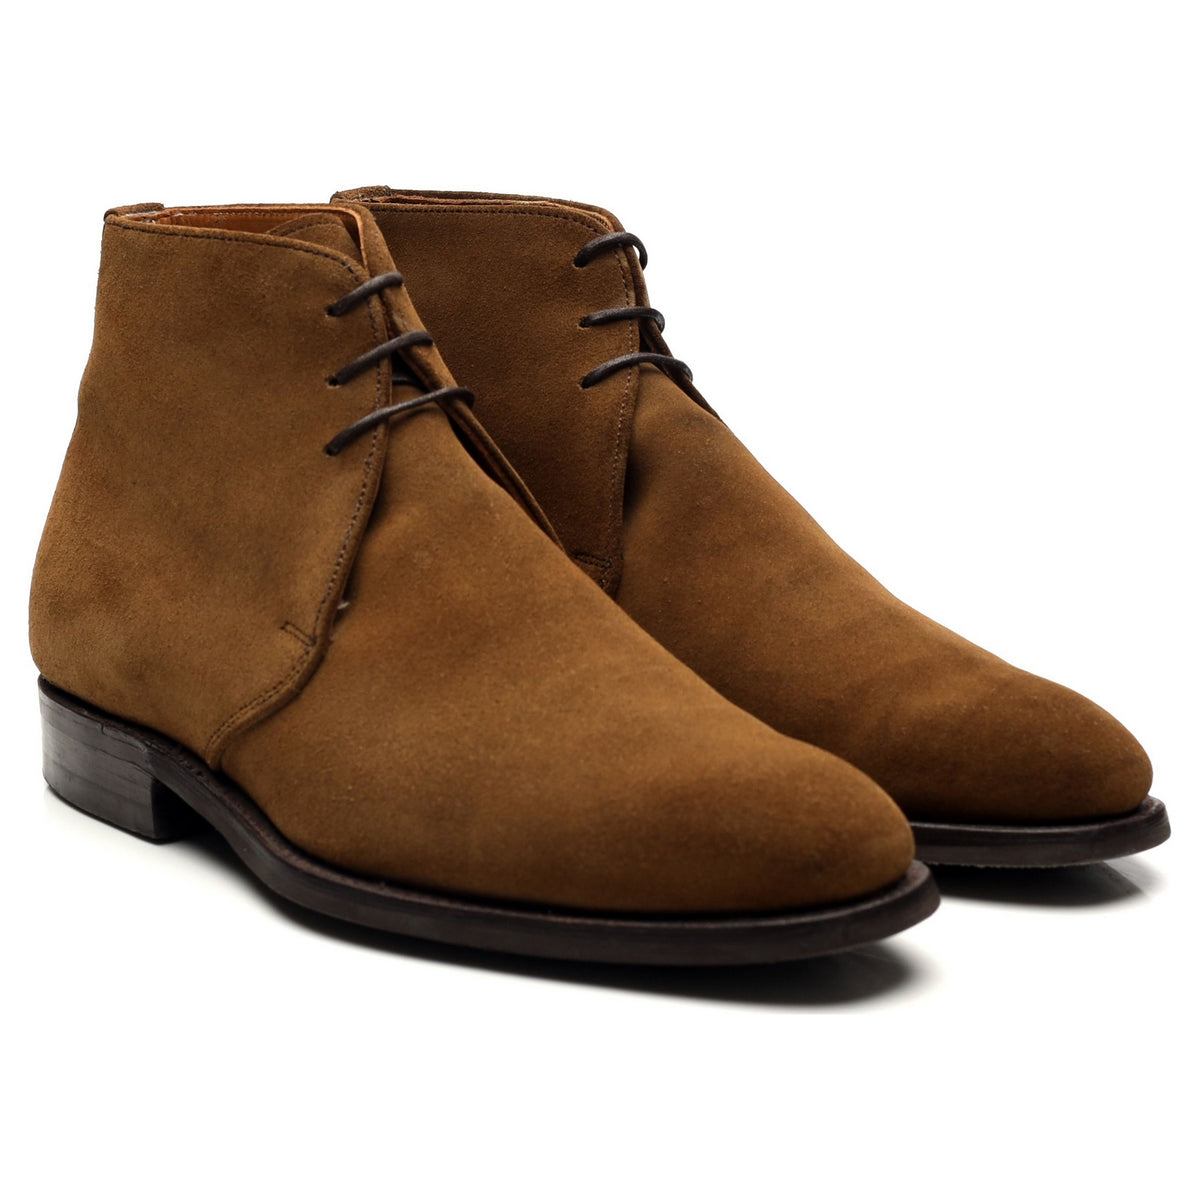 Sand Brown Suede Chukka Boots UK 6 F